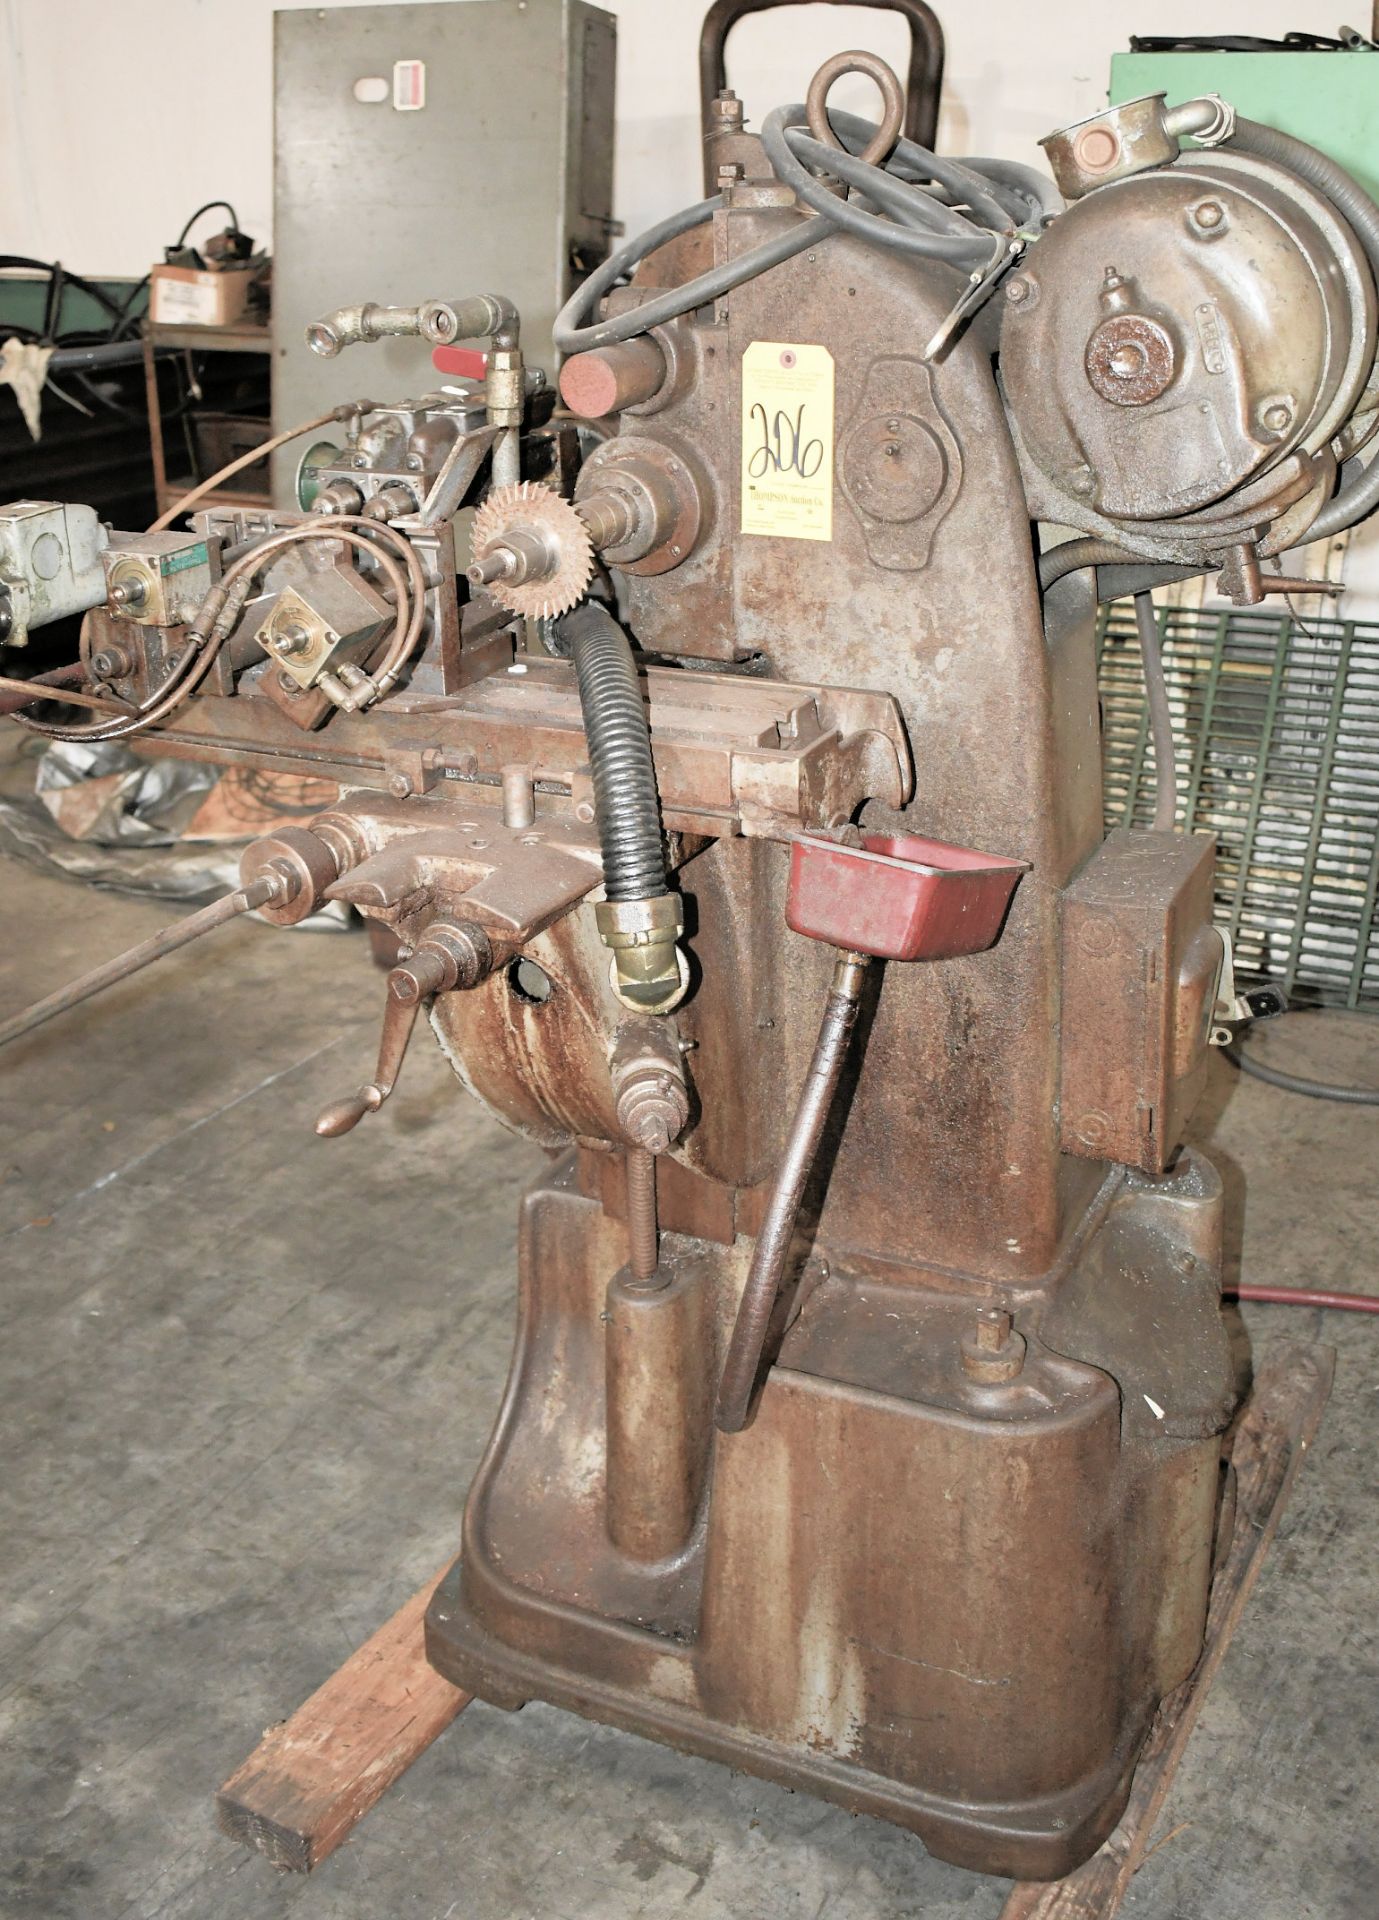 Waltham "Whiney" Horizontal Hand Miller Machine, S/n 4-E-182, 7" x 24" Table, 3-Spindle Horizontal